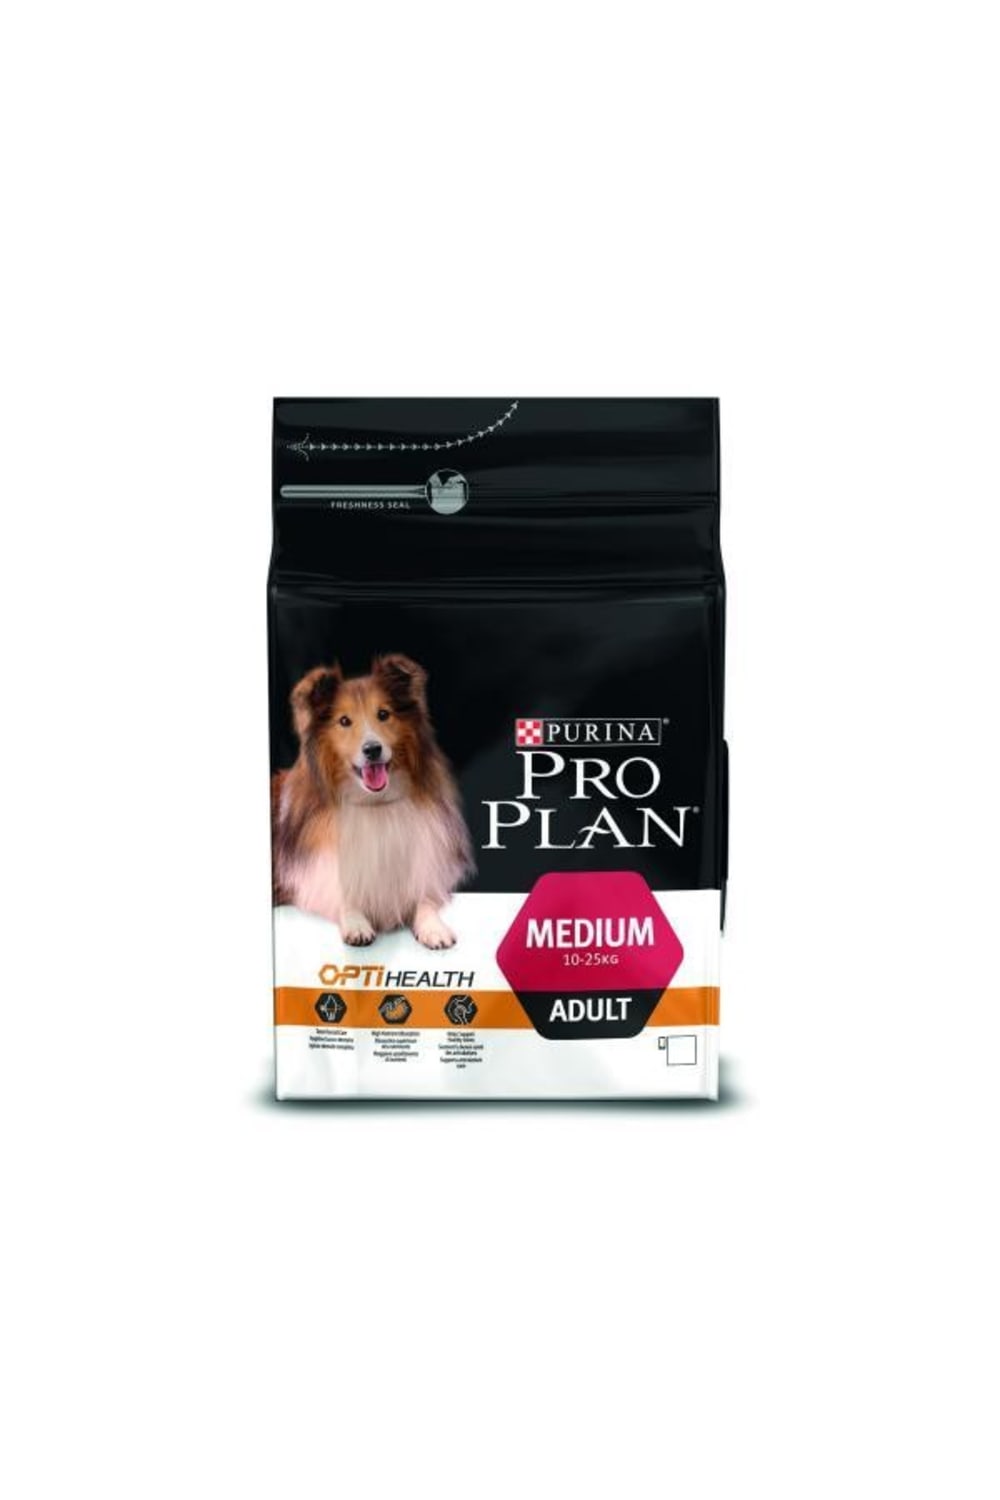 Pro Plan Medium Chicken And Rice Adult Dry Dog Food (May Vary) (6.6lbs)